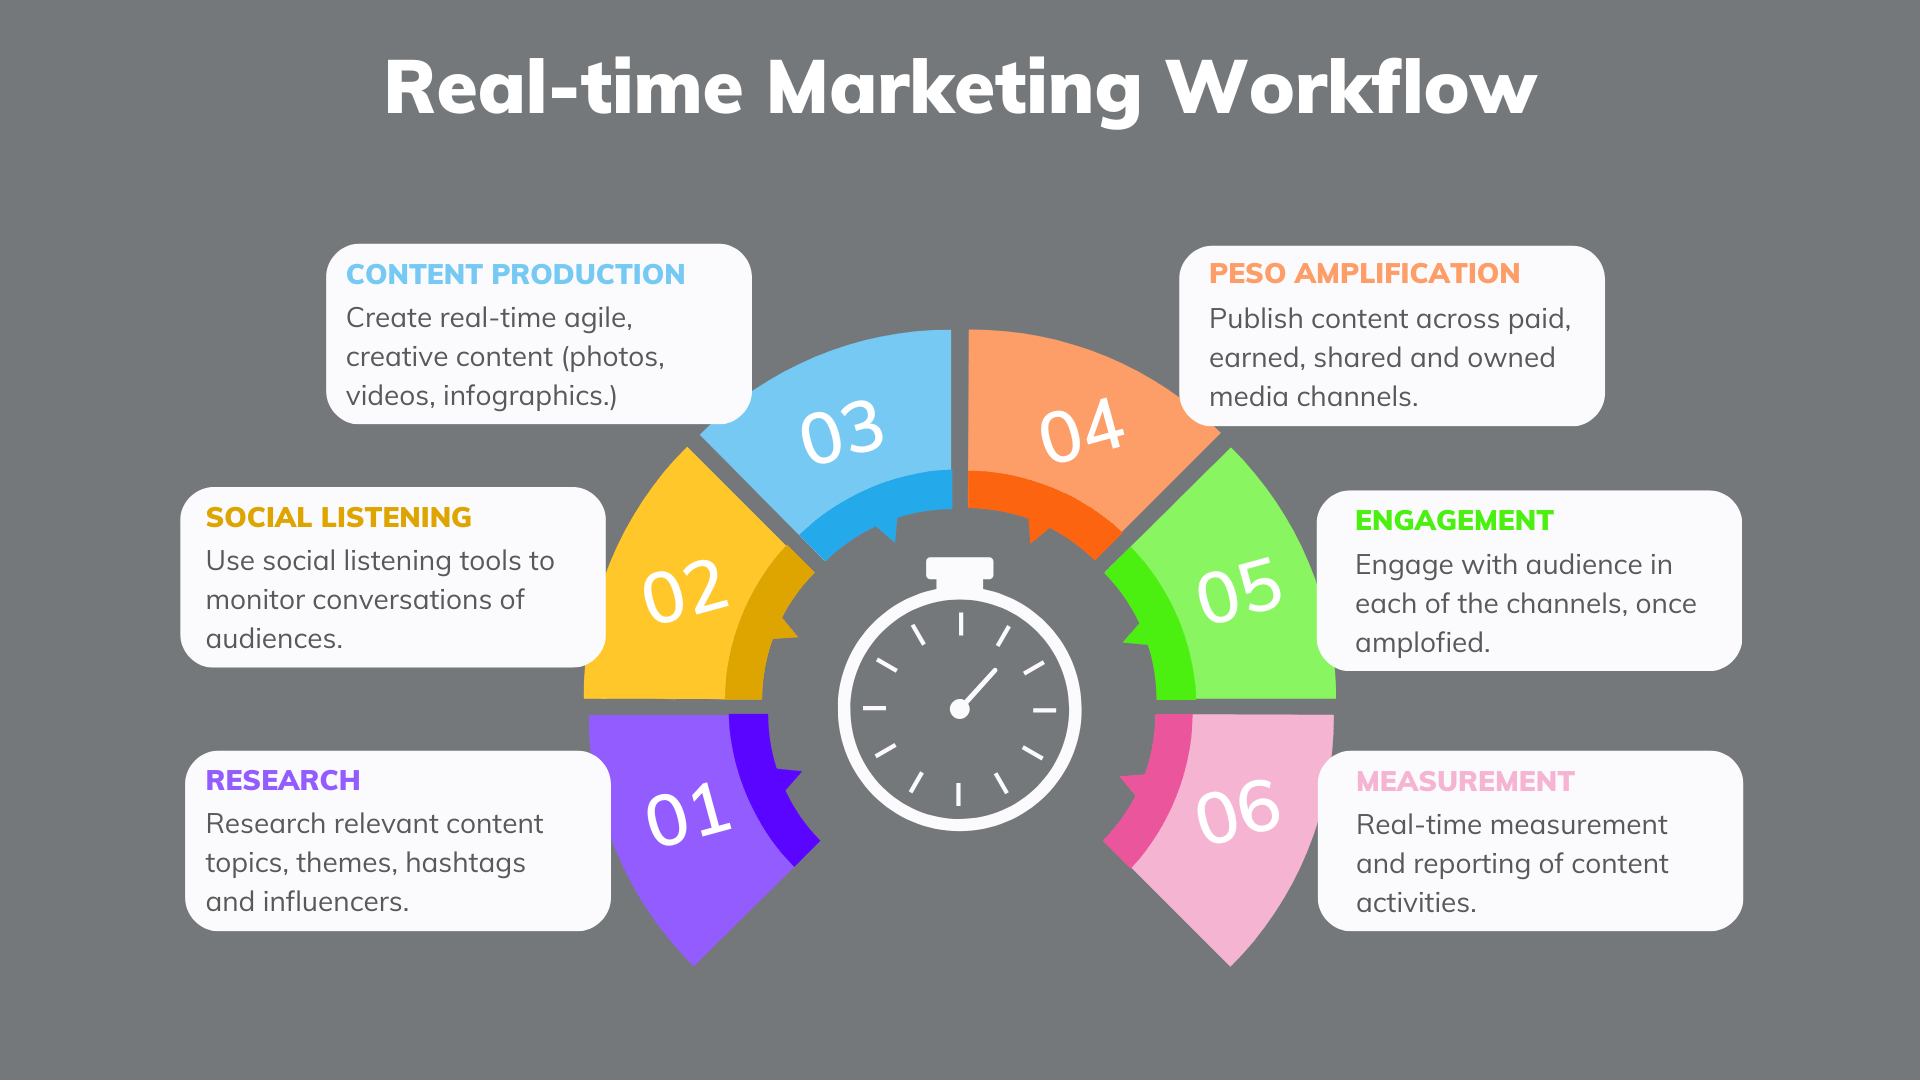 Real-time marketing workflow and process.